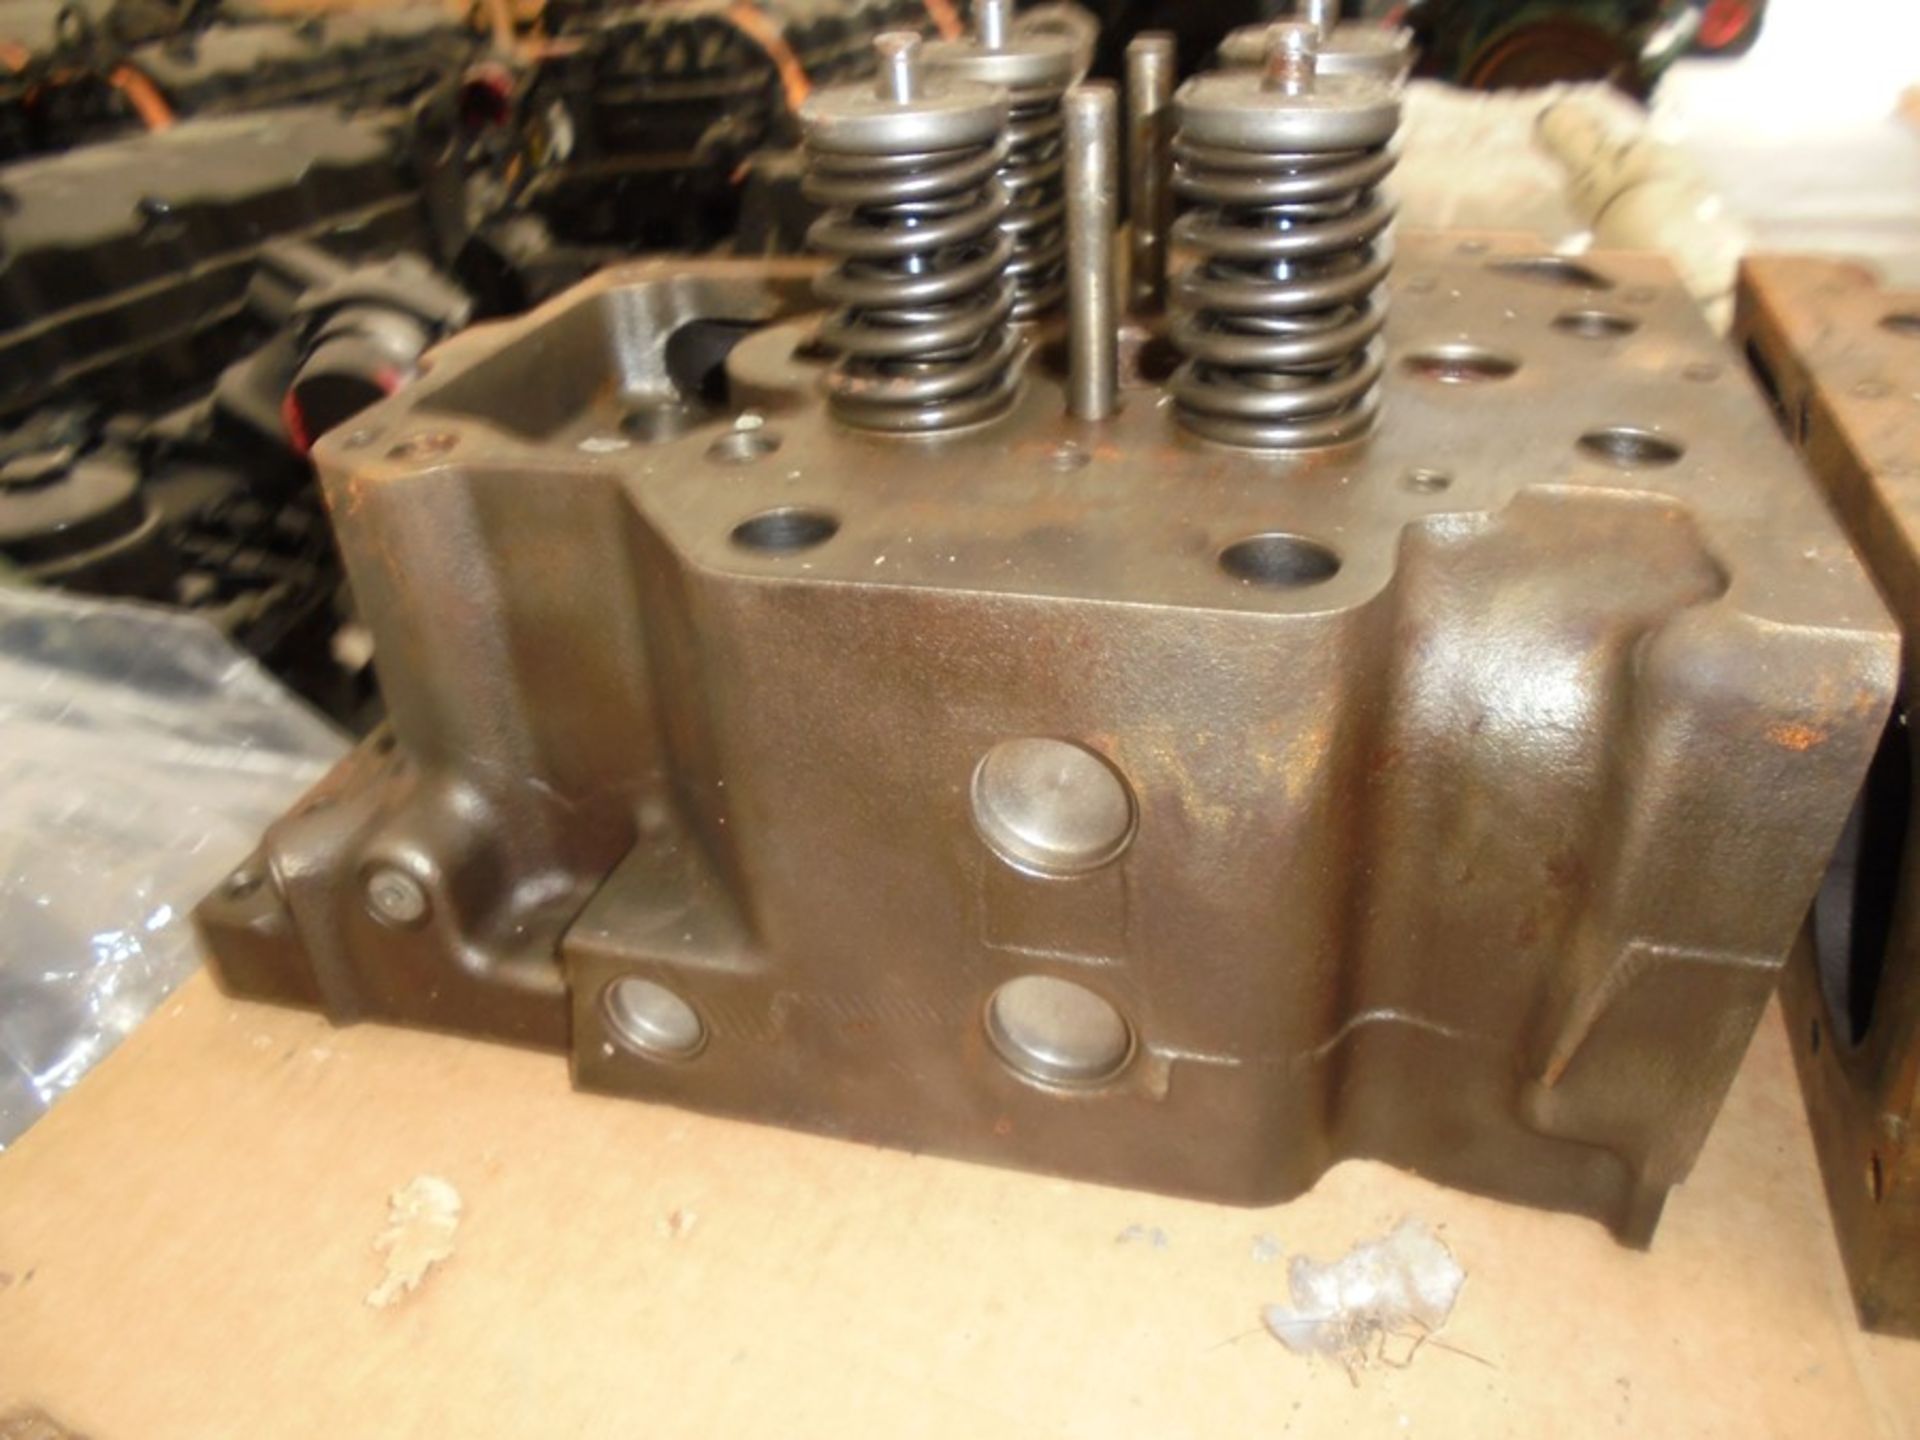 8 x used Caterpillar 3516 cylinder head, part numbers 205-1560 and 20R3547s (mostly without valves). - Image 2 of 6